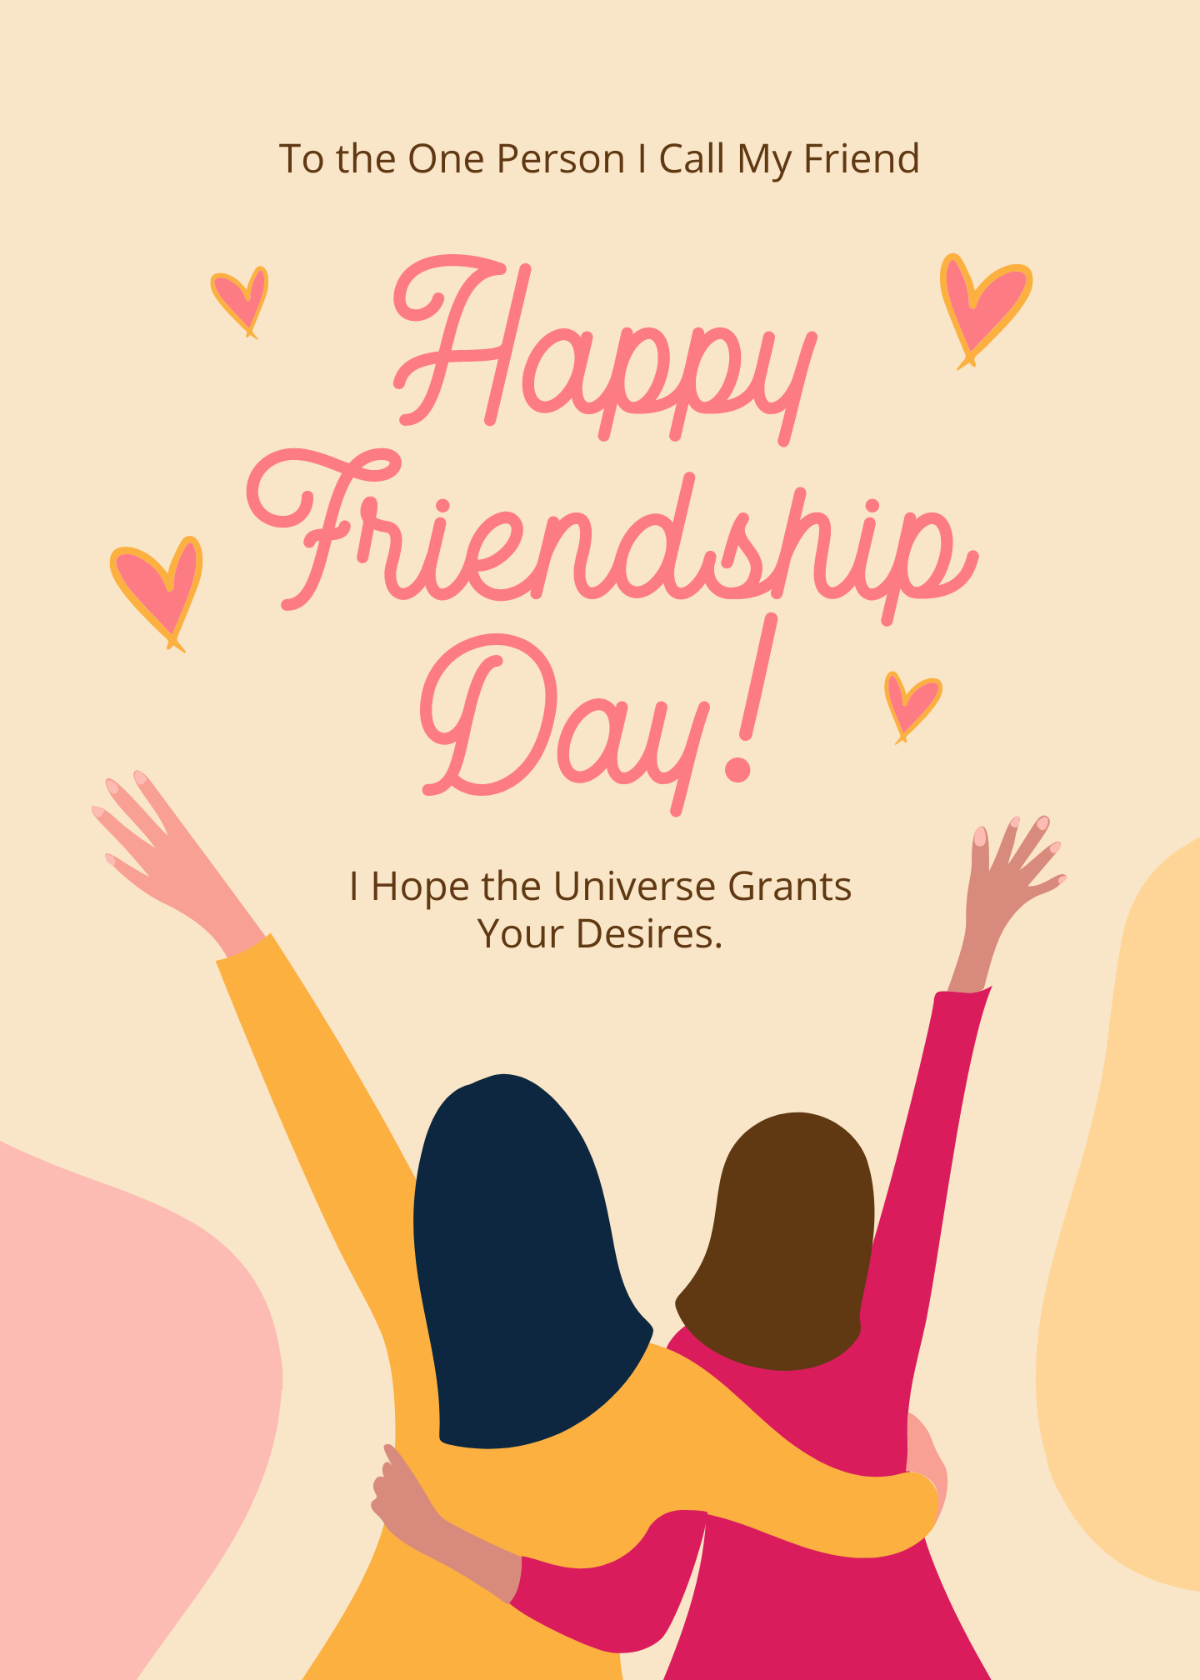 Friendship Day Wishes Card Template